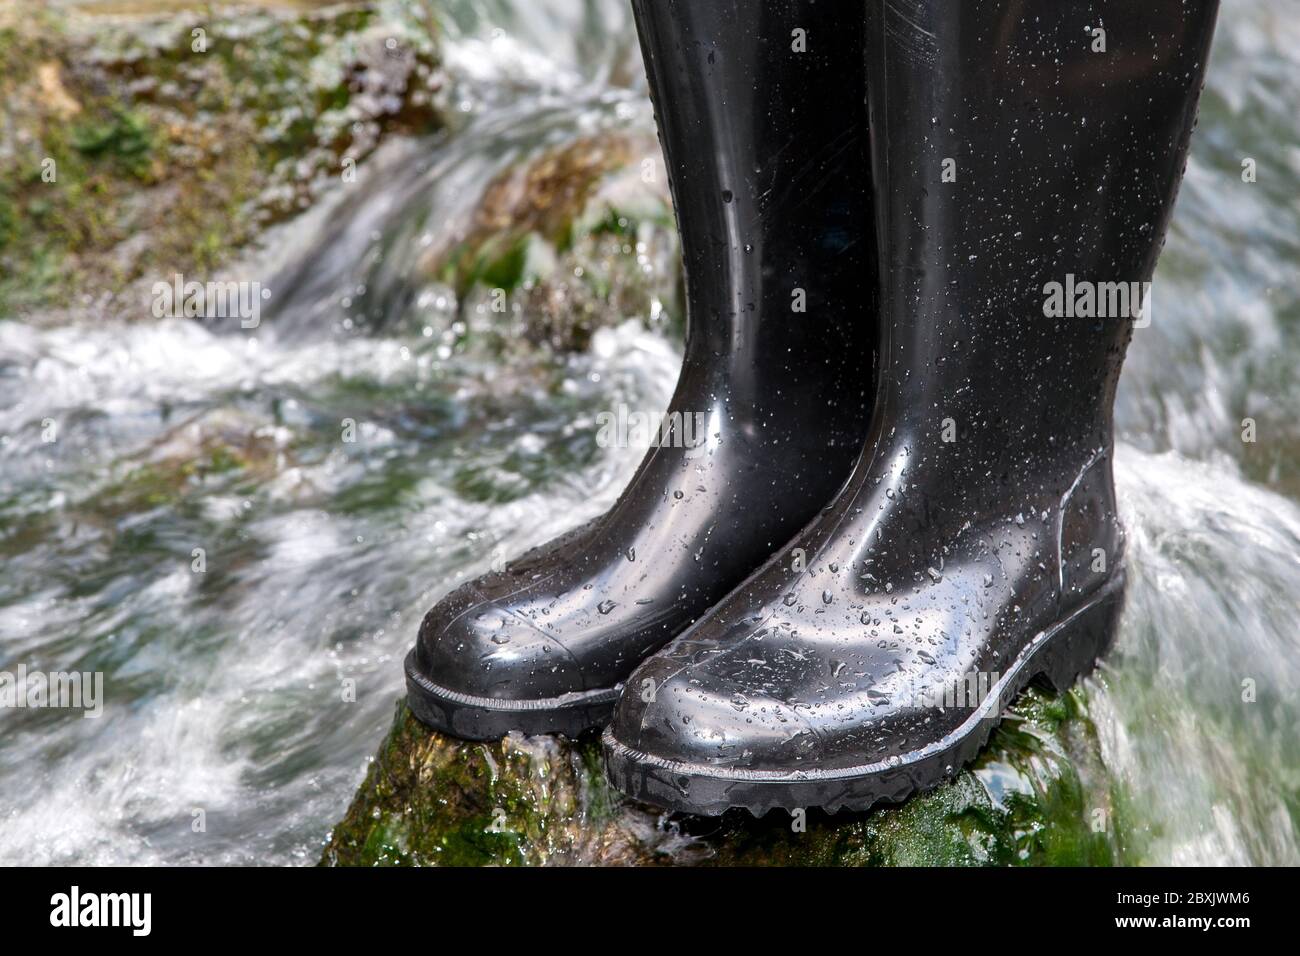 Black rubber boots stand on a moss-covered stone in the middle of the rushing water of a creek. Stock Photo